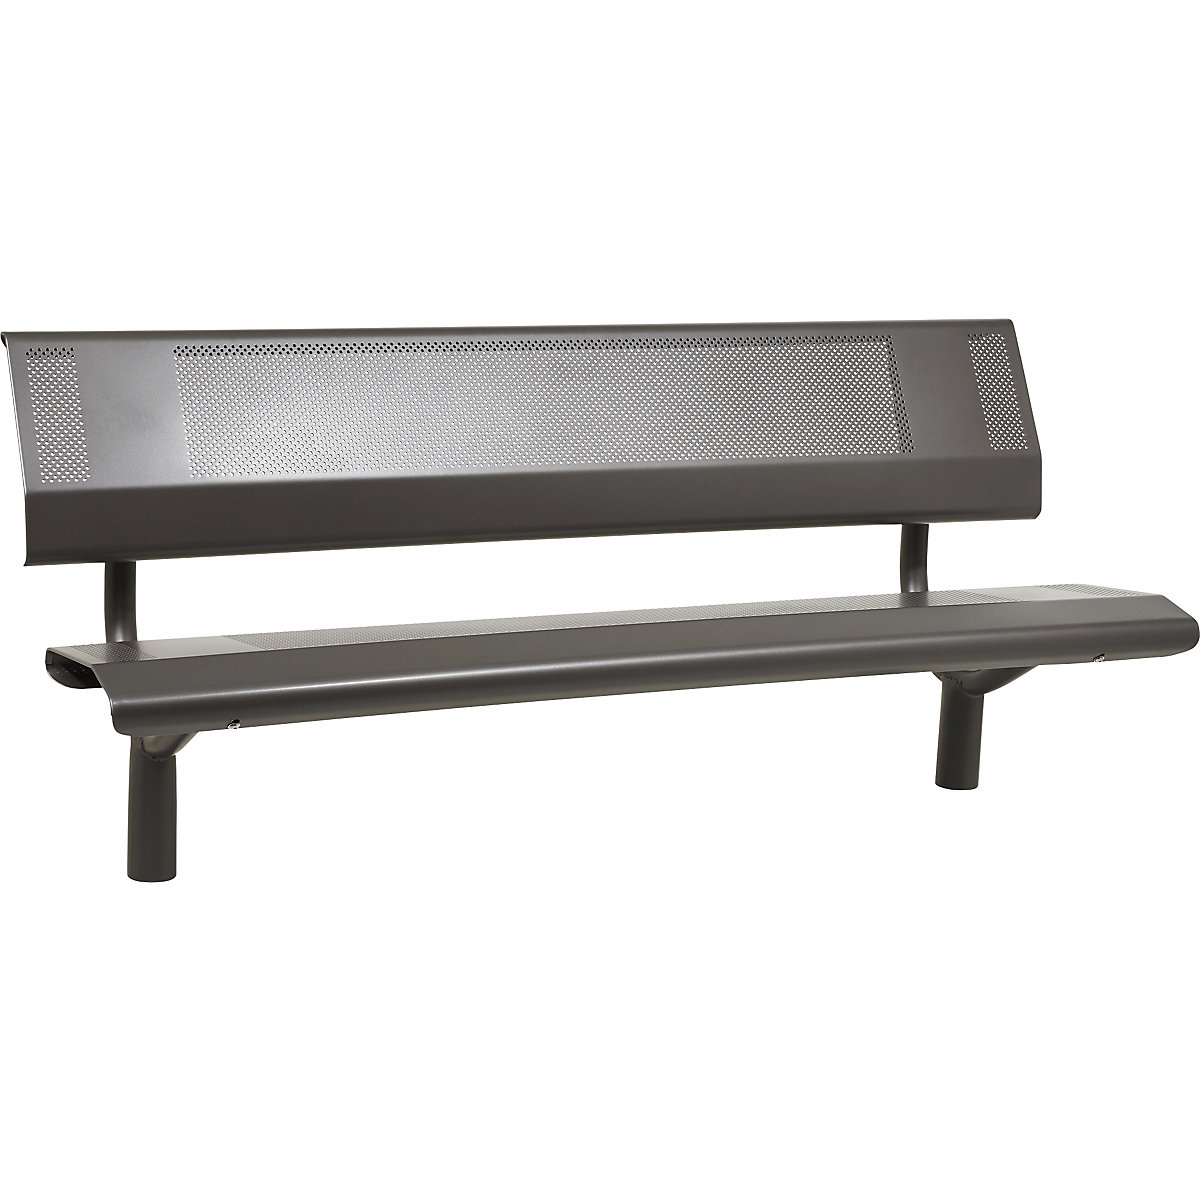 OSLO bench made of steel – PROCITY, seat height 450 mm, length 1800 mm, charcoal, with back rest-5